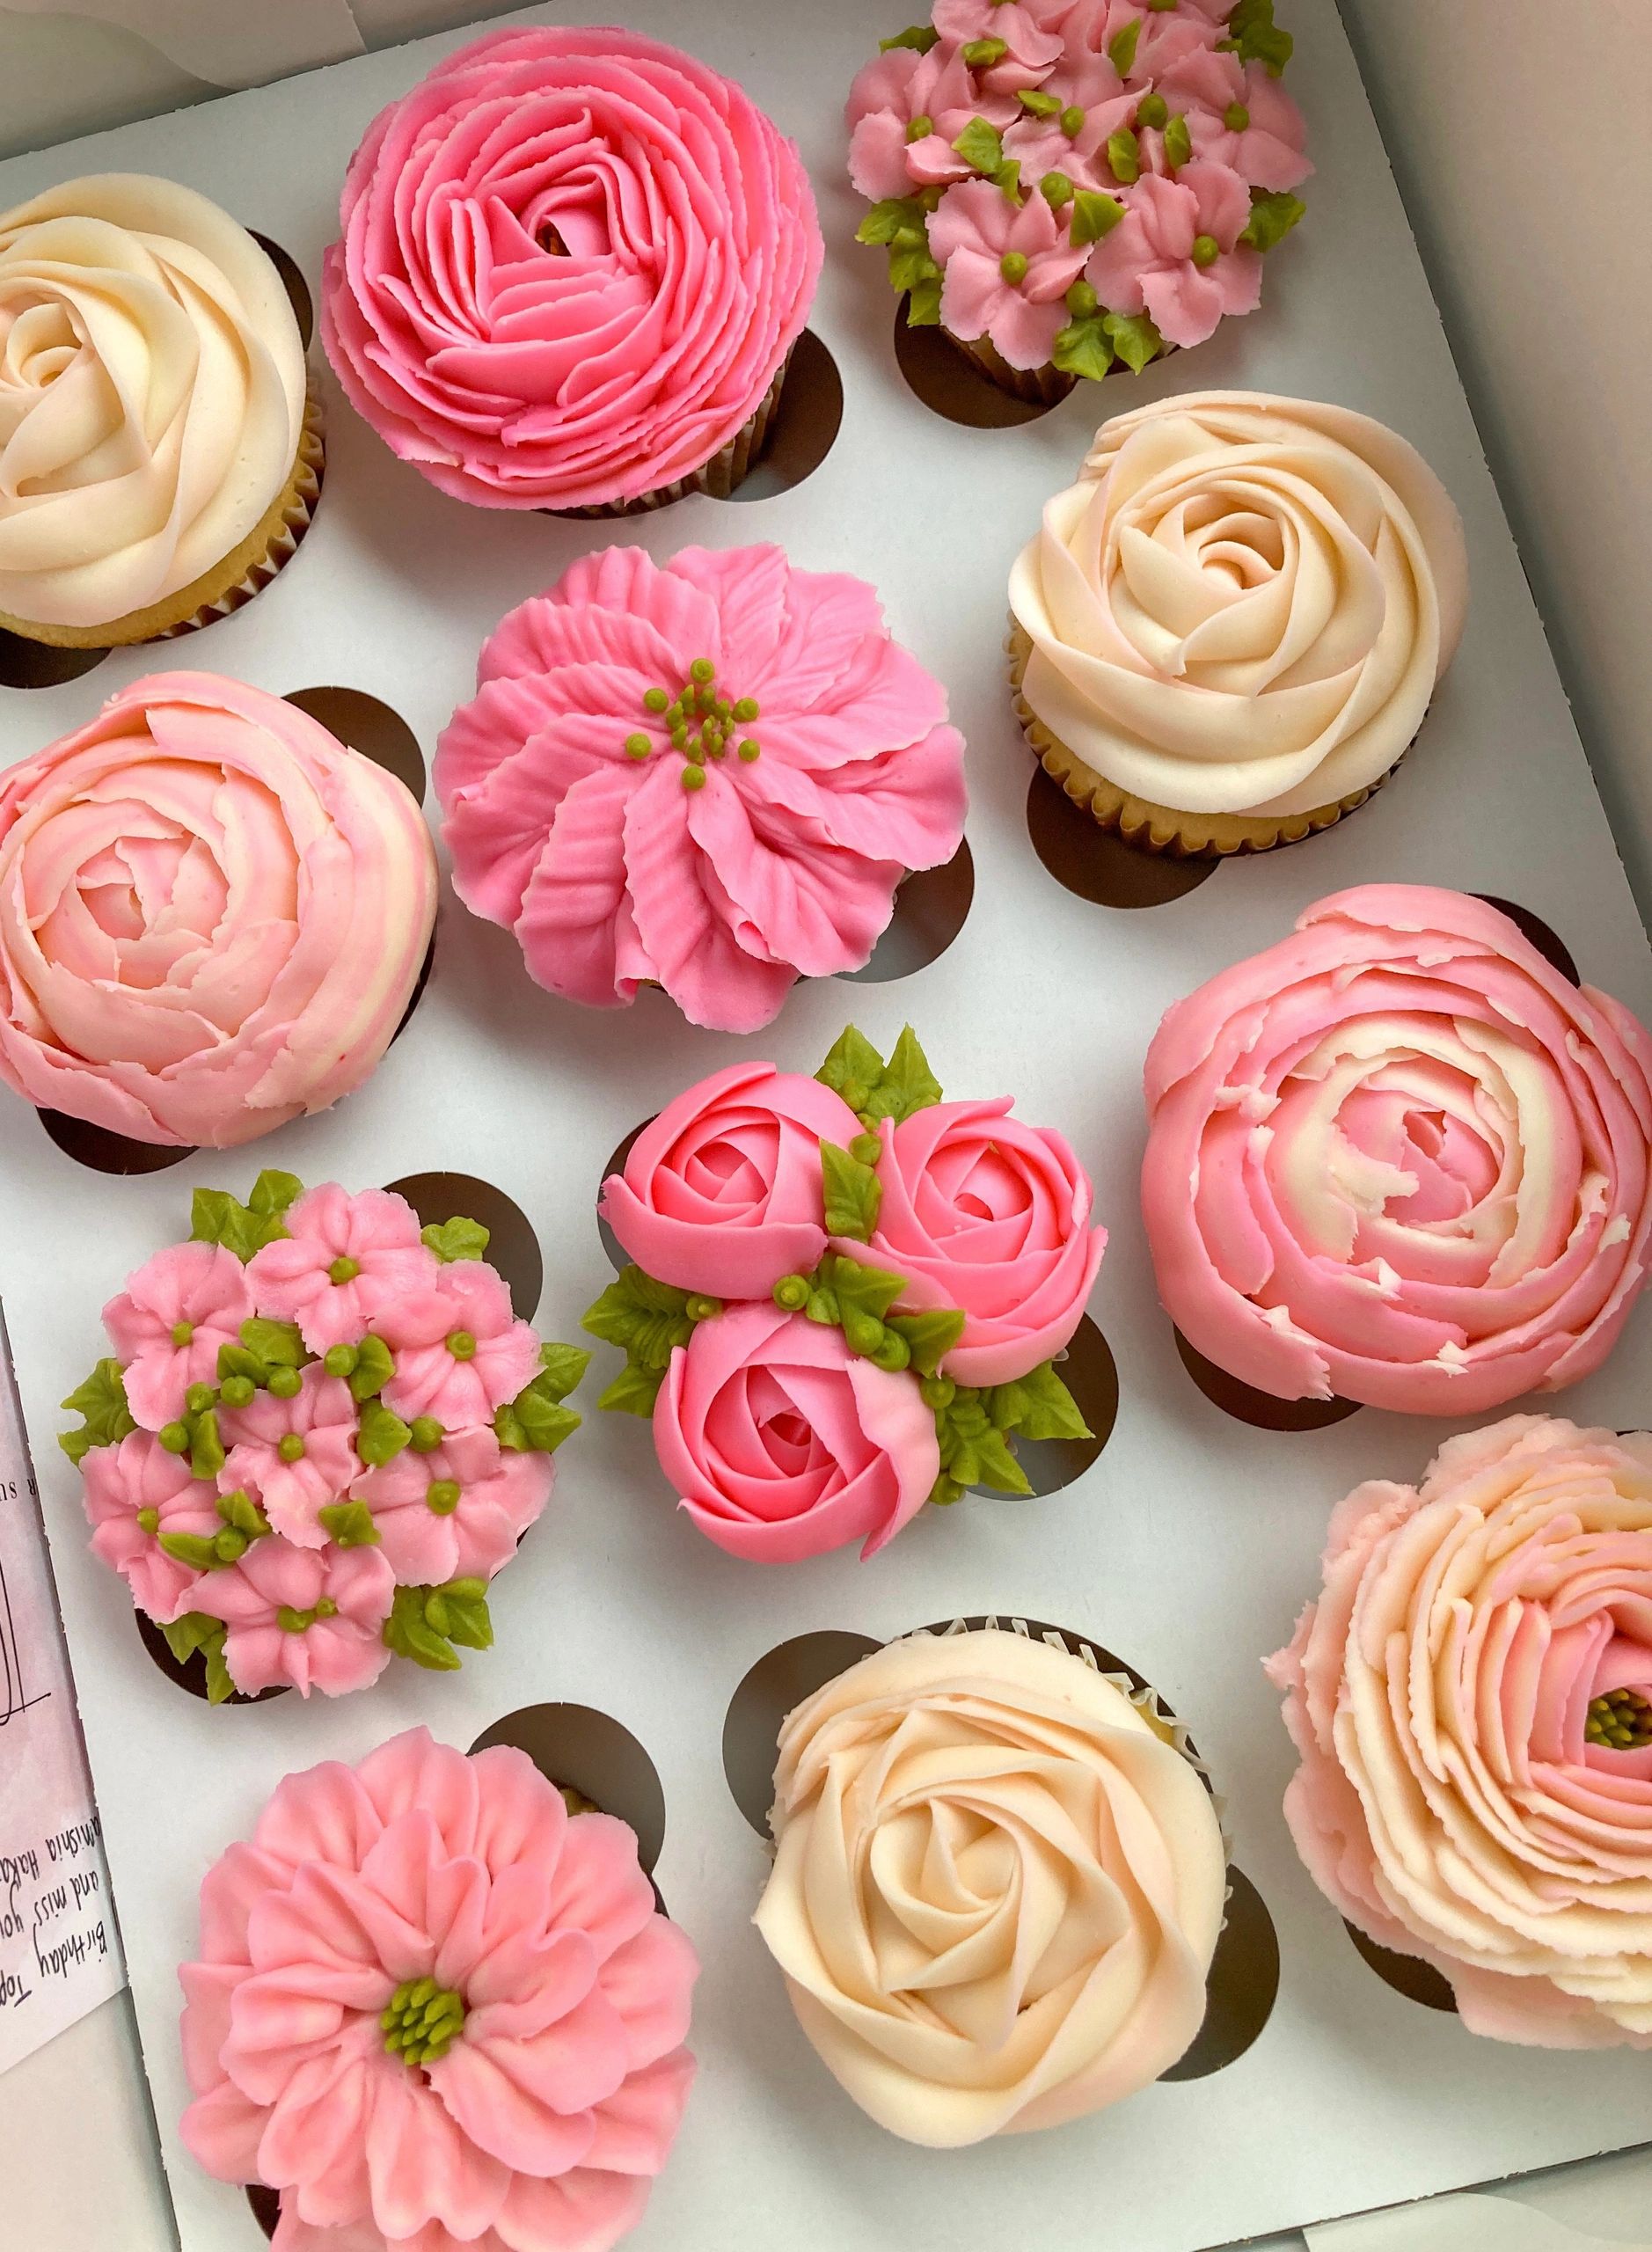 The Flower Cupcake Co.